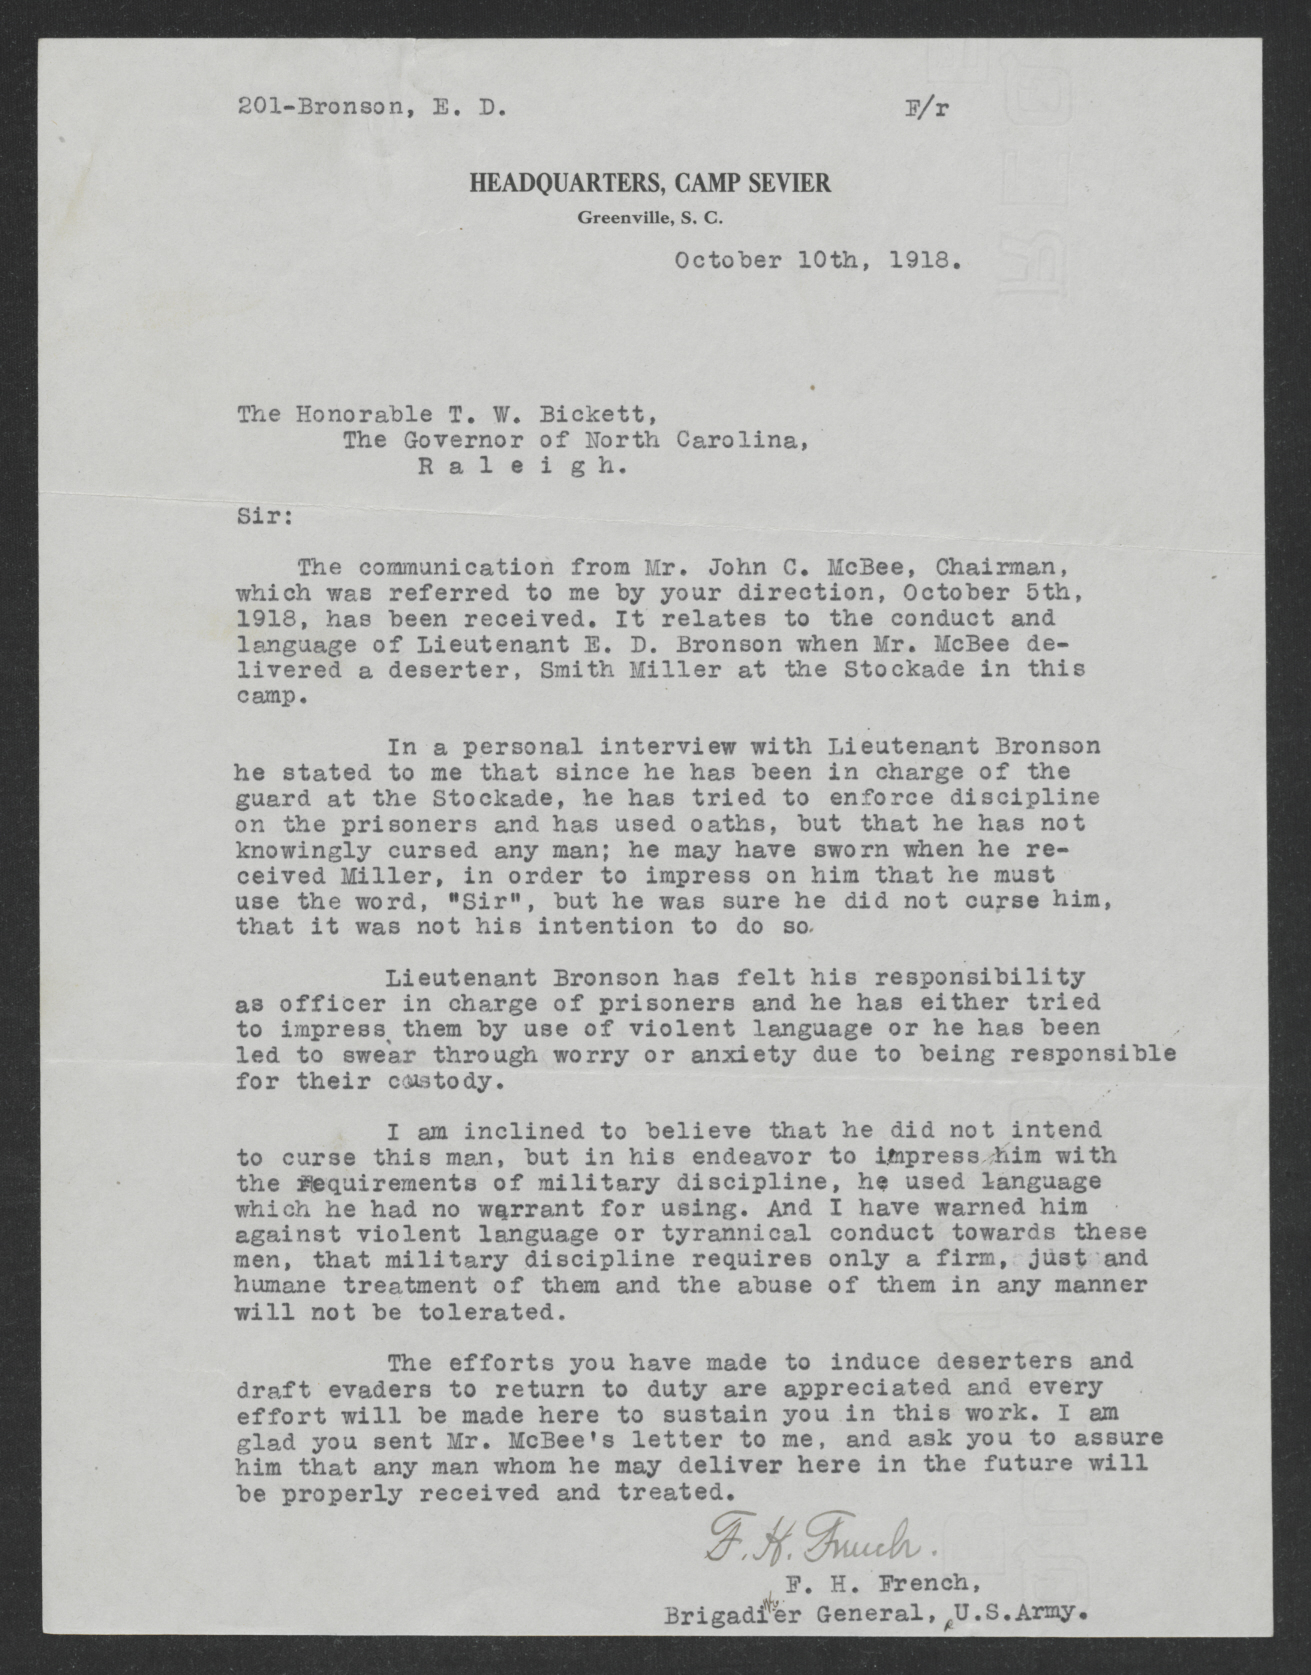 Letter from Francis H. French to Thomas W. Bickett, October 10, 1918